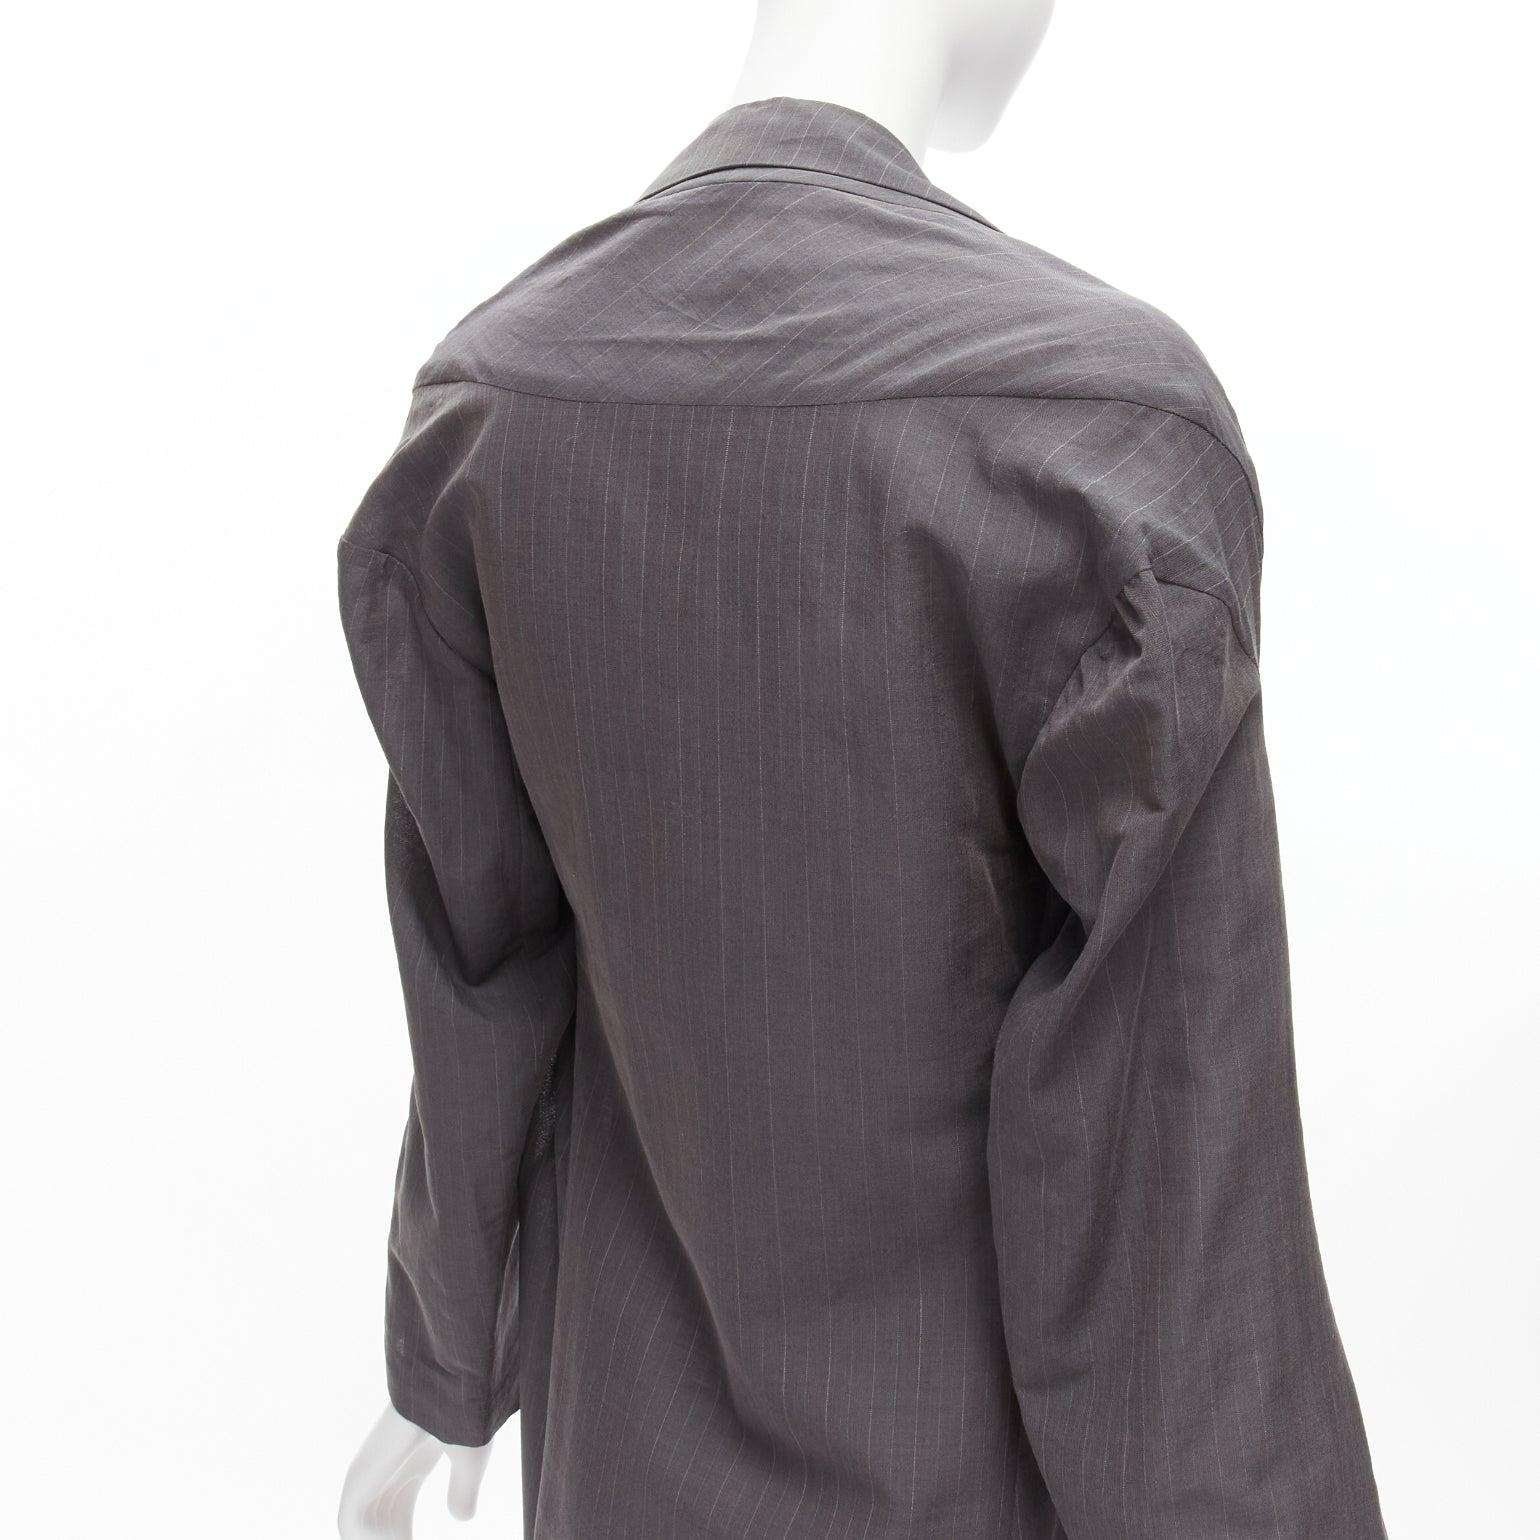 YOHJI YAMAMOTO grey notched peak lapel A-line wide cut coat JP1 S
Reference: TGAS/D00573
Brand: Yohji Yamamoto
Designer: Yohji Yamamoto
Material: Rayon, Blend
Color: Grey
Pattern: Pinstriped
Extra Details: 3-D sleeve cutting.
Made in: